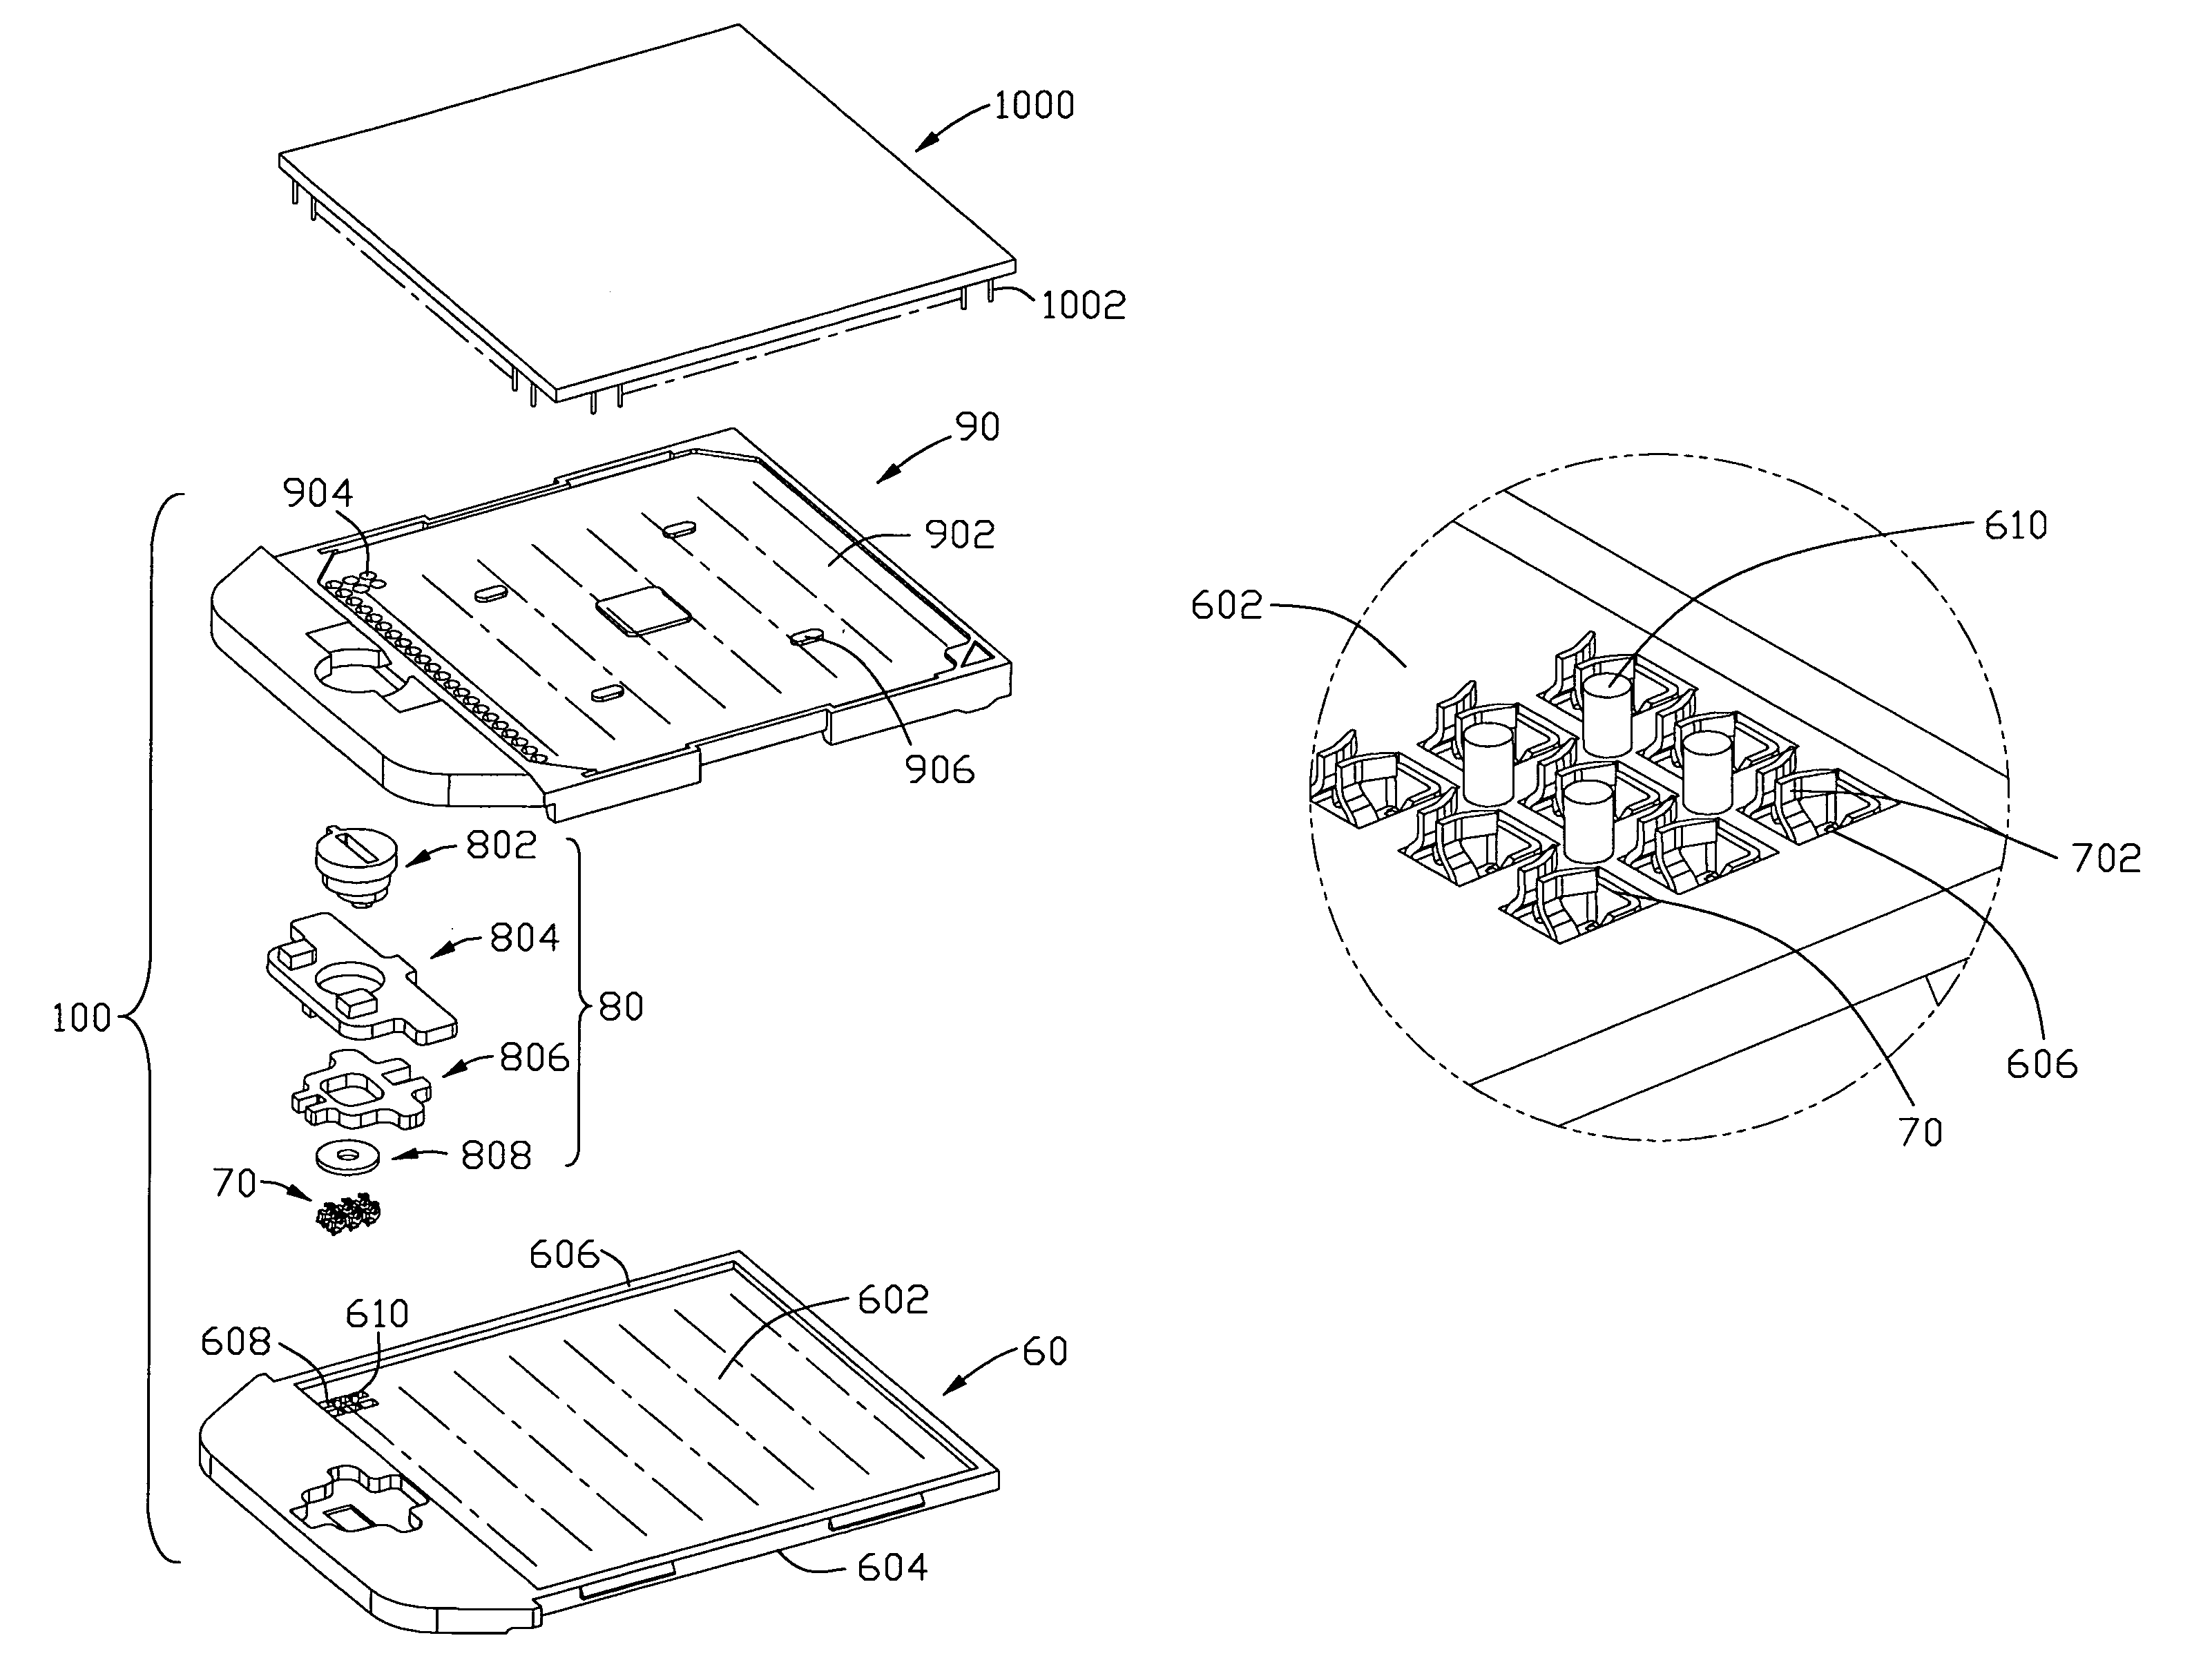 Pin grid array socket having a base with interior standoffs and hightening peripheral walls